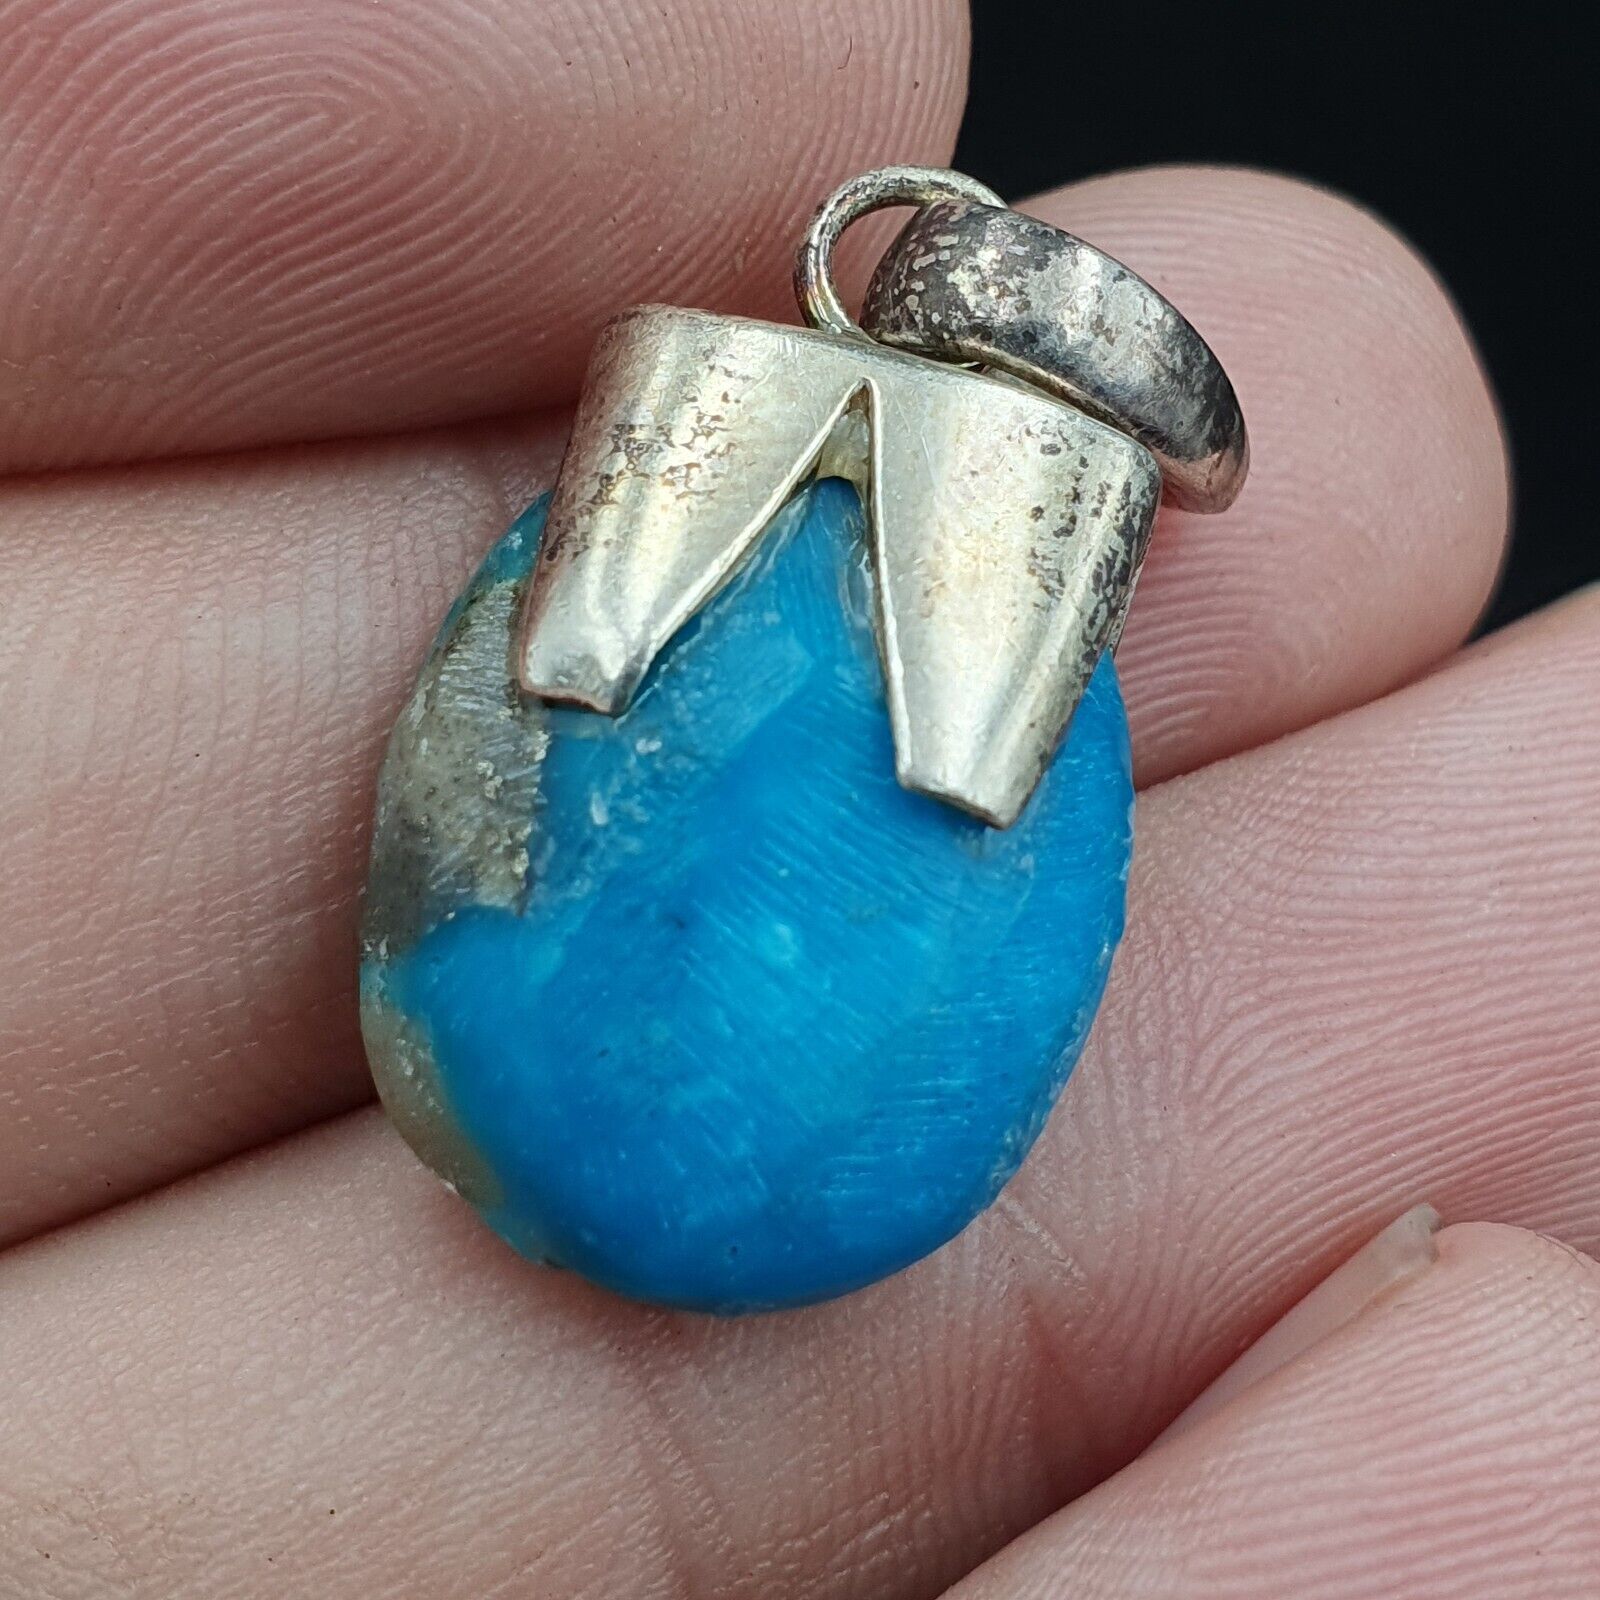 Beautiful Natural Blue Turquois Cab Sterling Silver Pendant